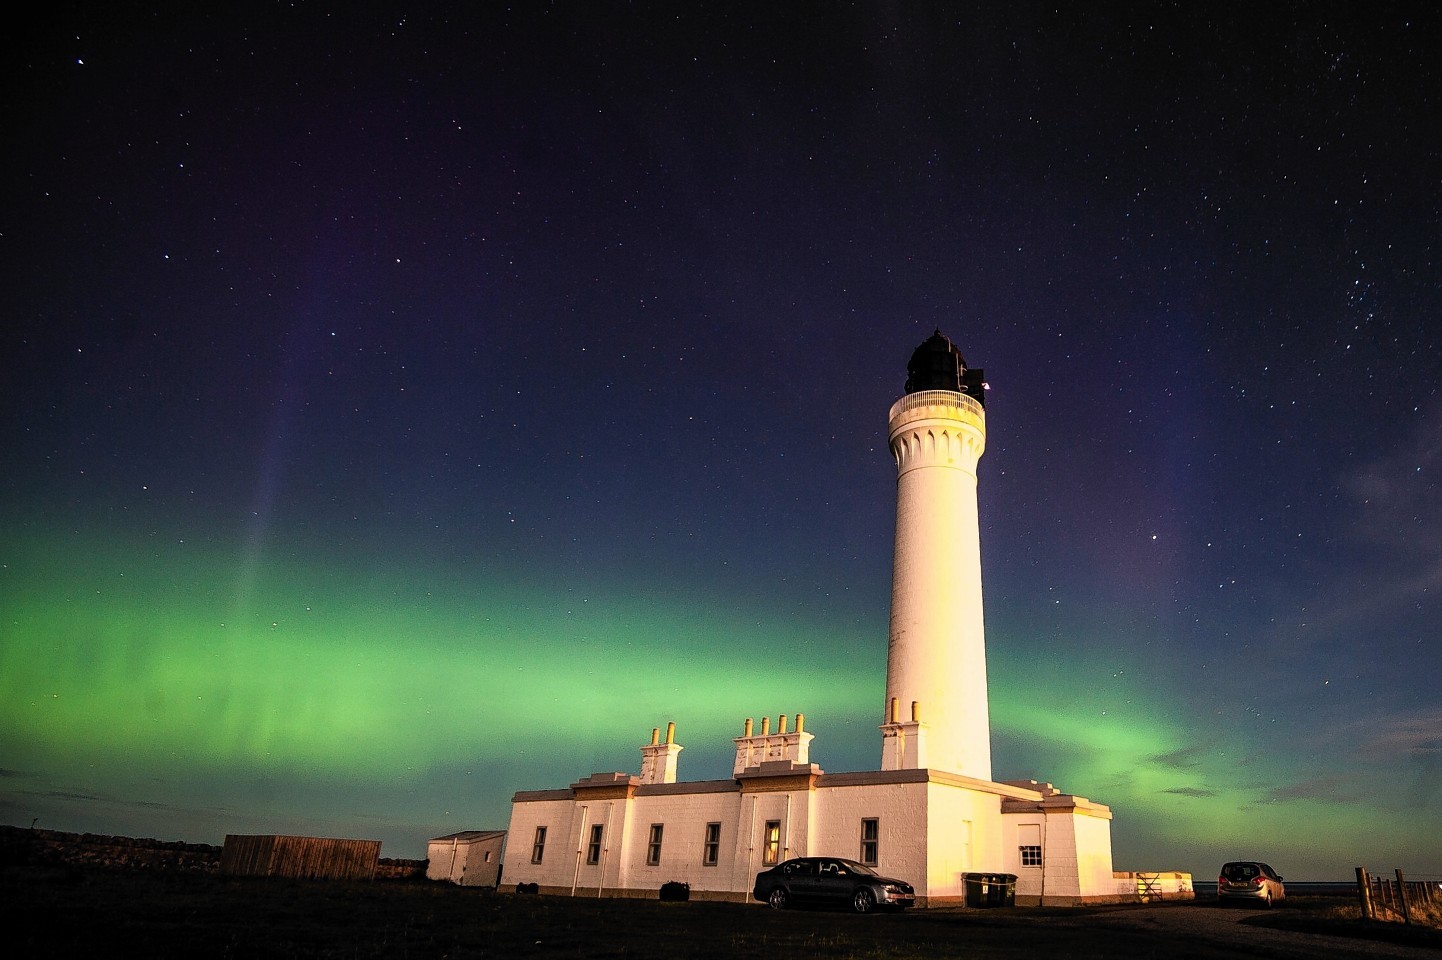 The Northern Lights, seen here lighting up the sky over Lossiemouth, Moray